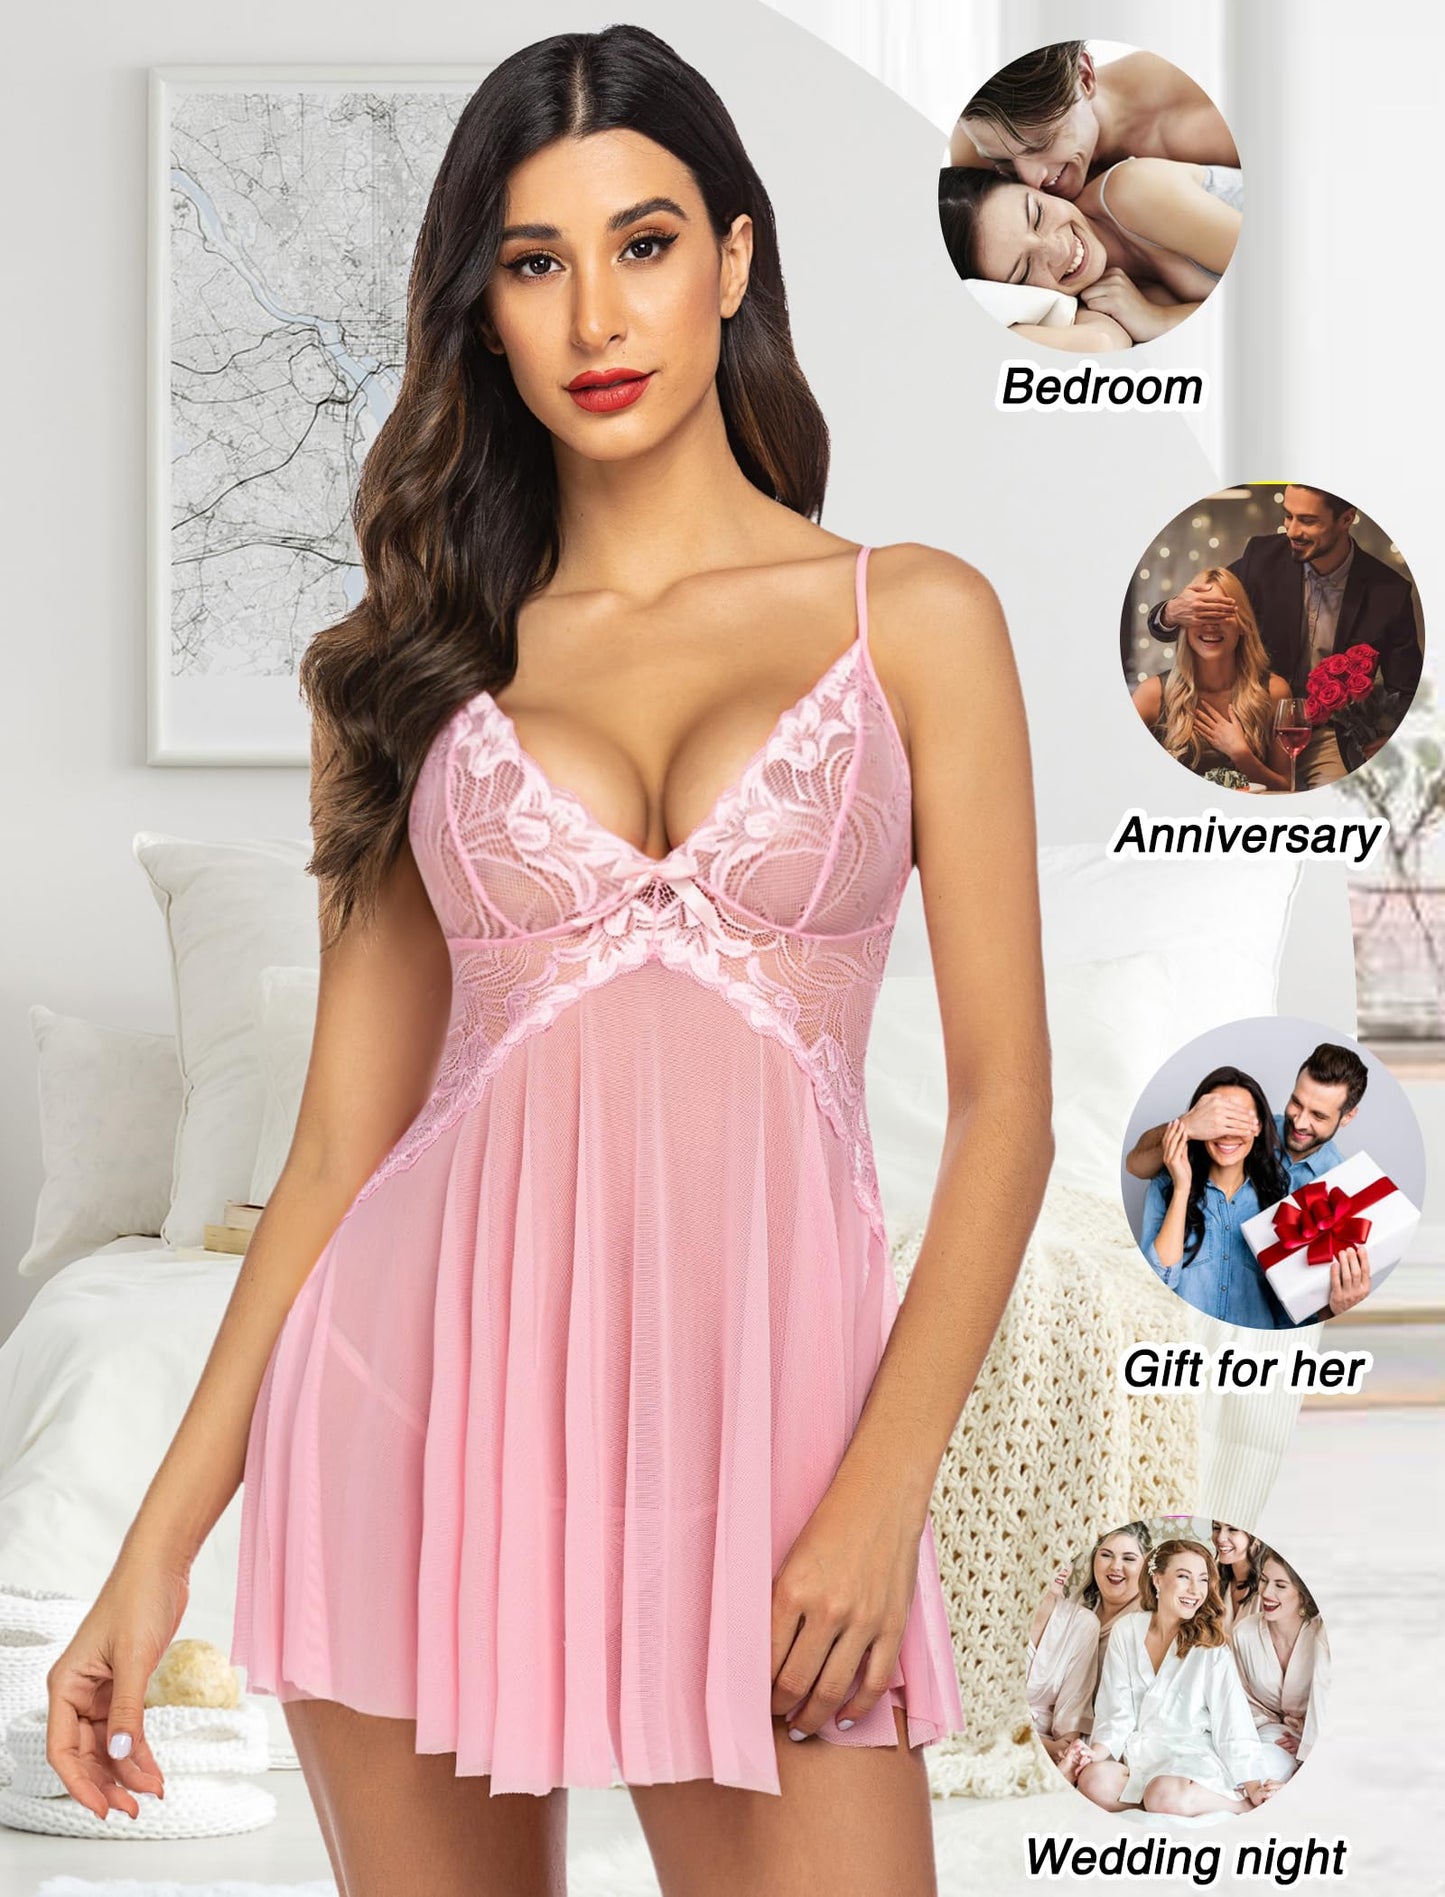 Avidlove Women Lace Lingerie Babydoll Sexy Chemise Exotic Nightgowns Bridal Nightdress